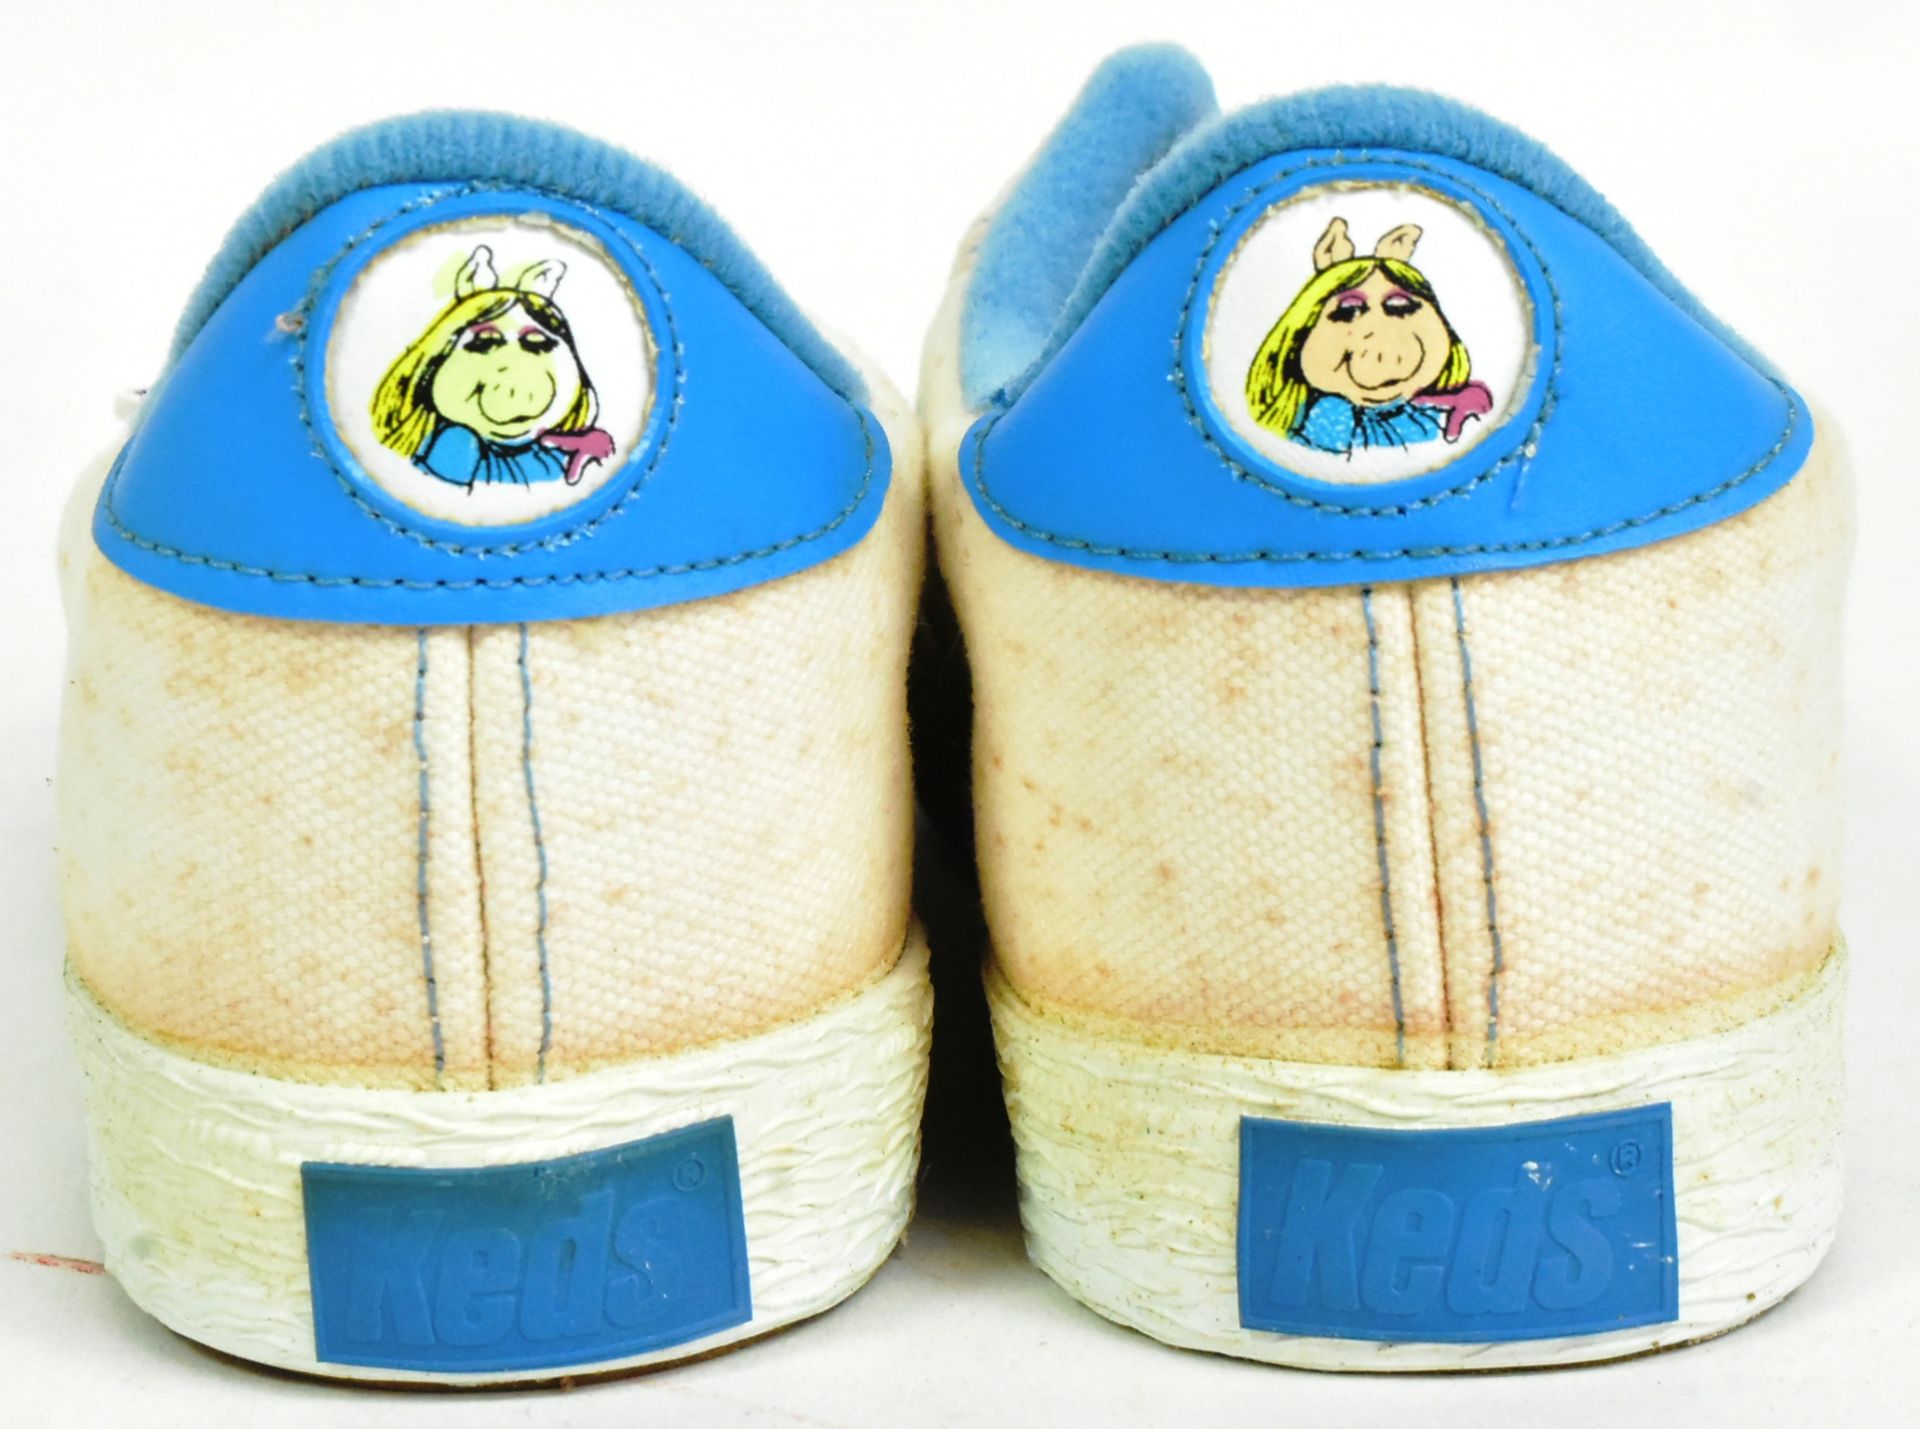 THE MUPPETS - VINTAGE KEDS SHOES - MISS PIGGY - Image 4 of 5